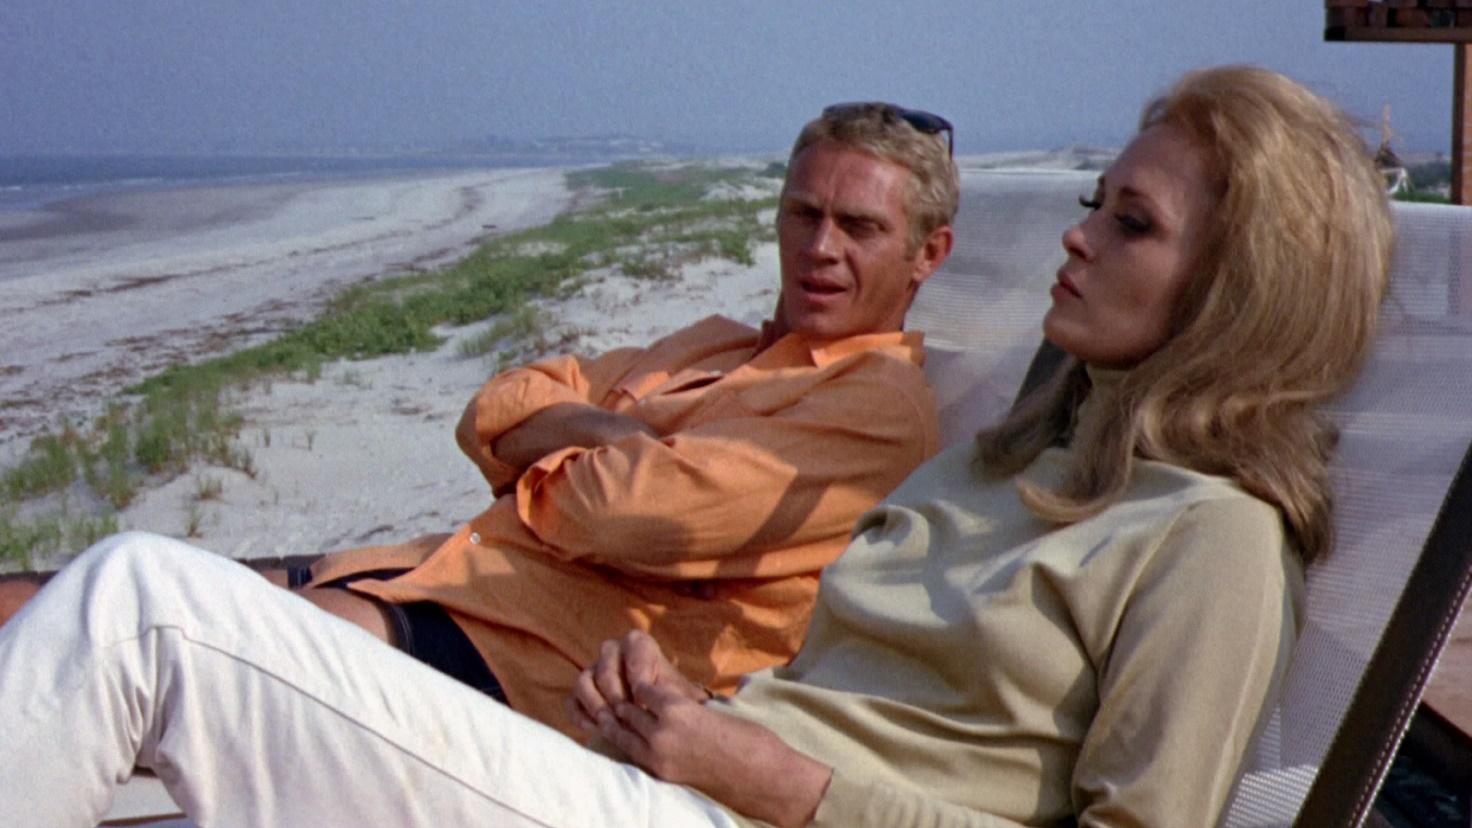 Faye Dunaway and Steve McQueen in The Thomas Crown Affair in 1968.